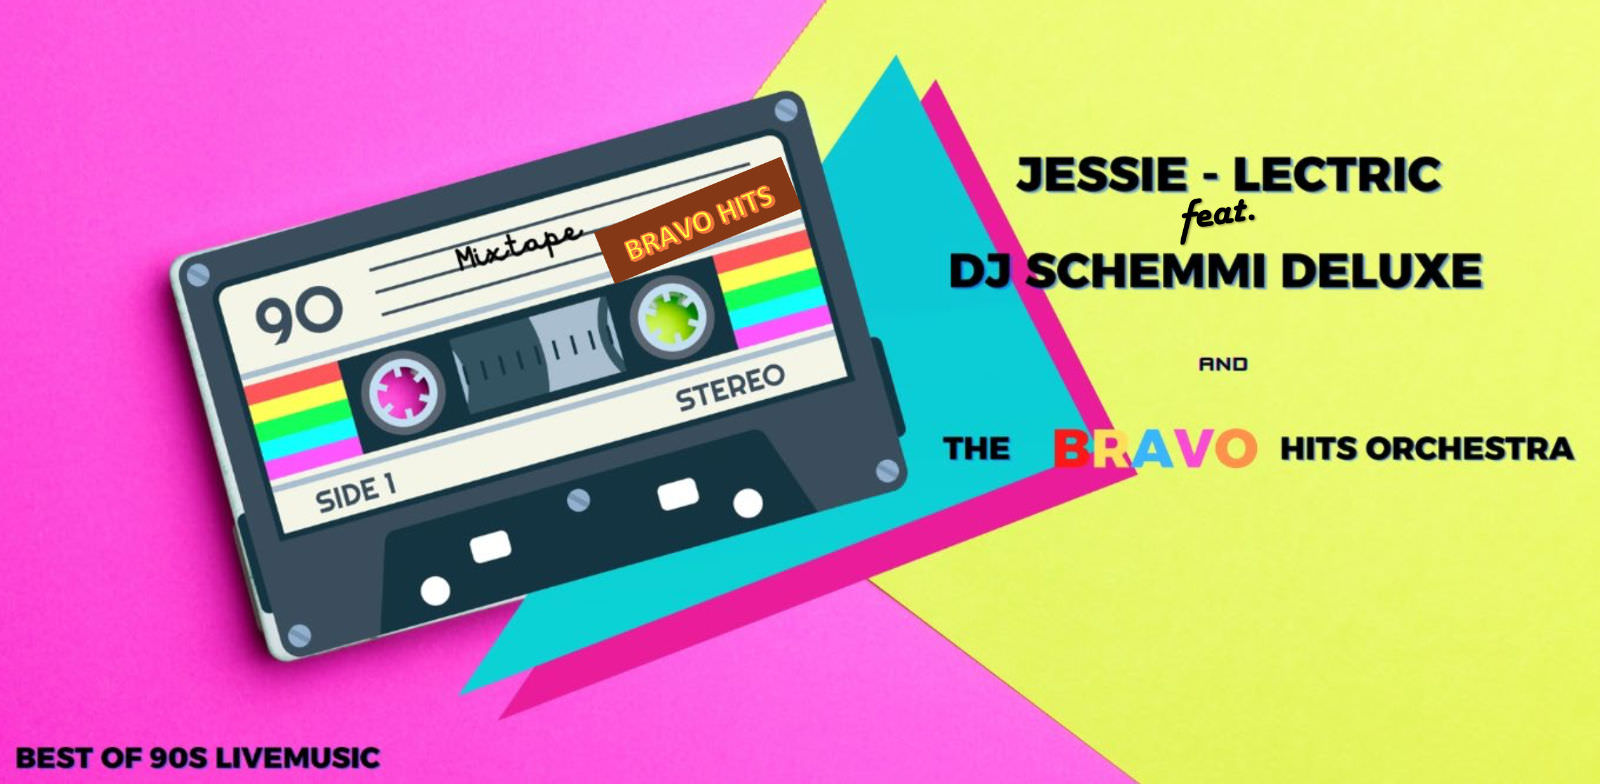 Jessielectric feat. Schemmi Deluxe & The Bravo Hits Orchestra